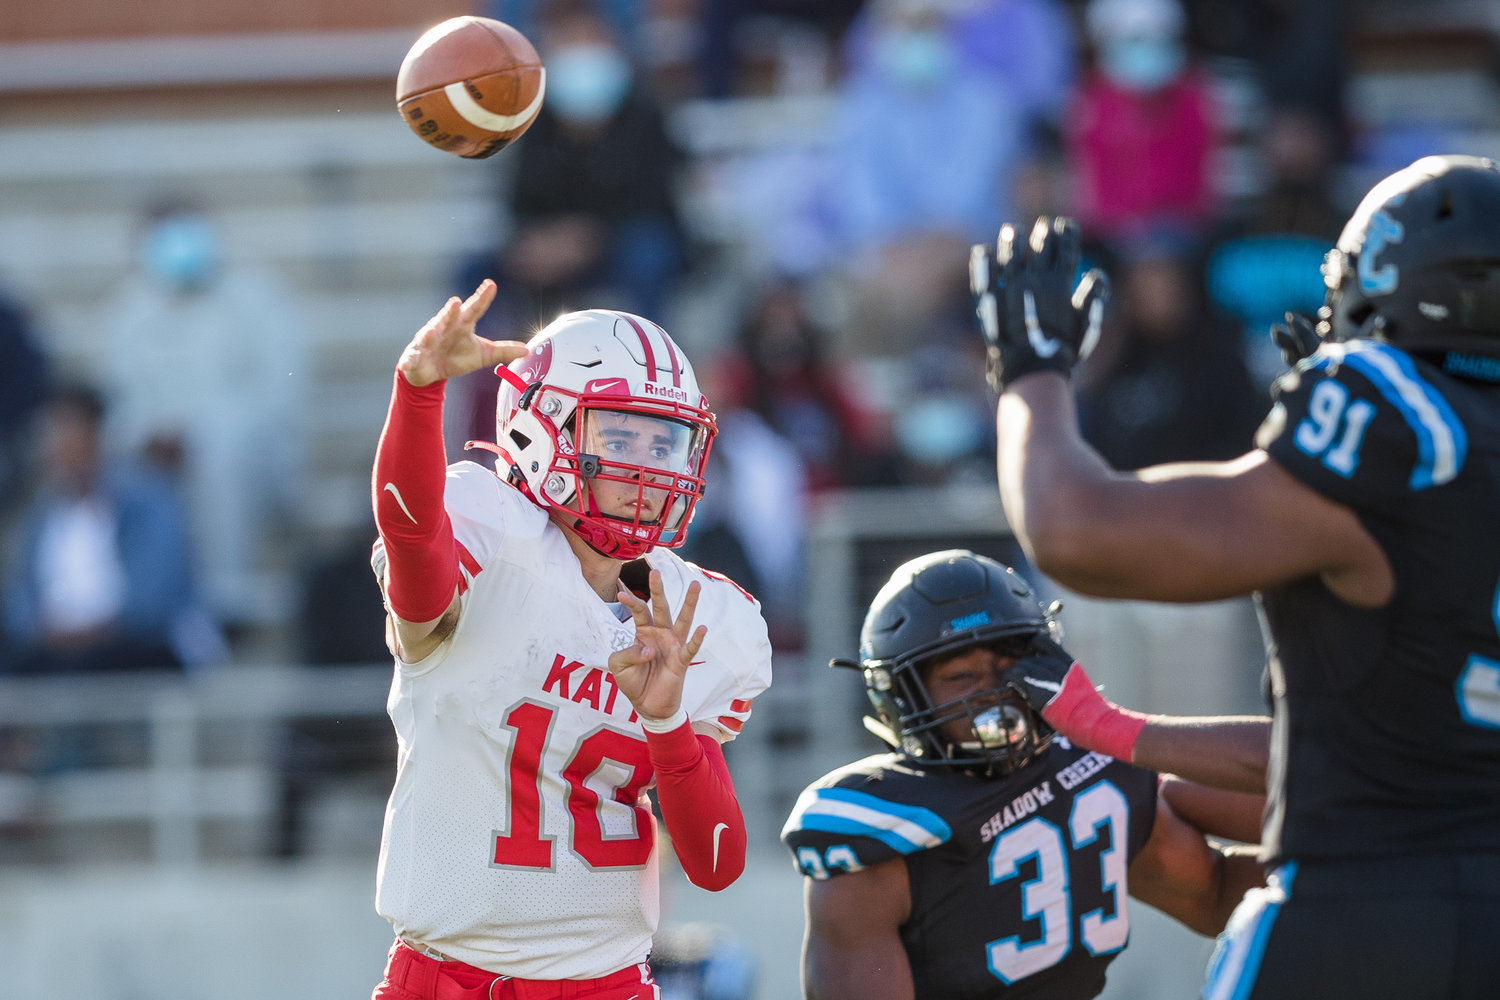 Katy High sophomore quarterback Caleb Koger (10) throws a pass during the Tigers’ 49-24 Class 6A-Division II regional semifinal win over Shadow Creek on Saturday, Dec. 26, at Freedom Field in Iowa Colony.